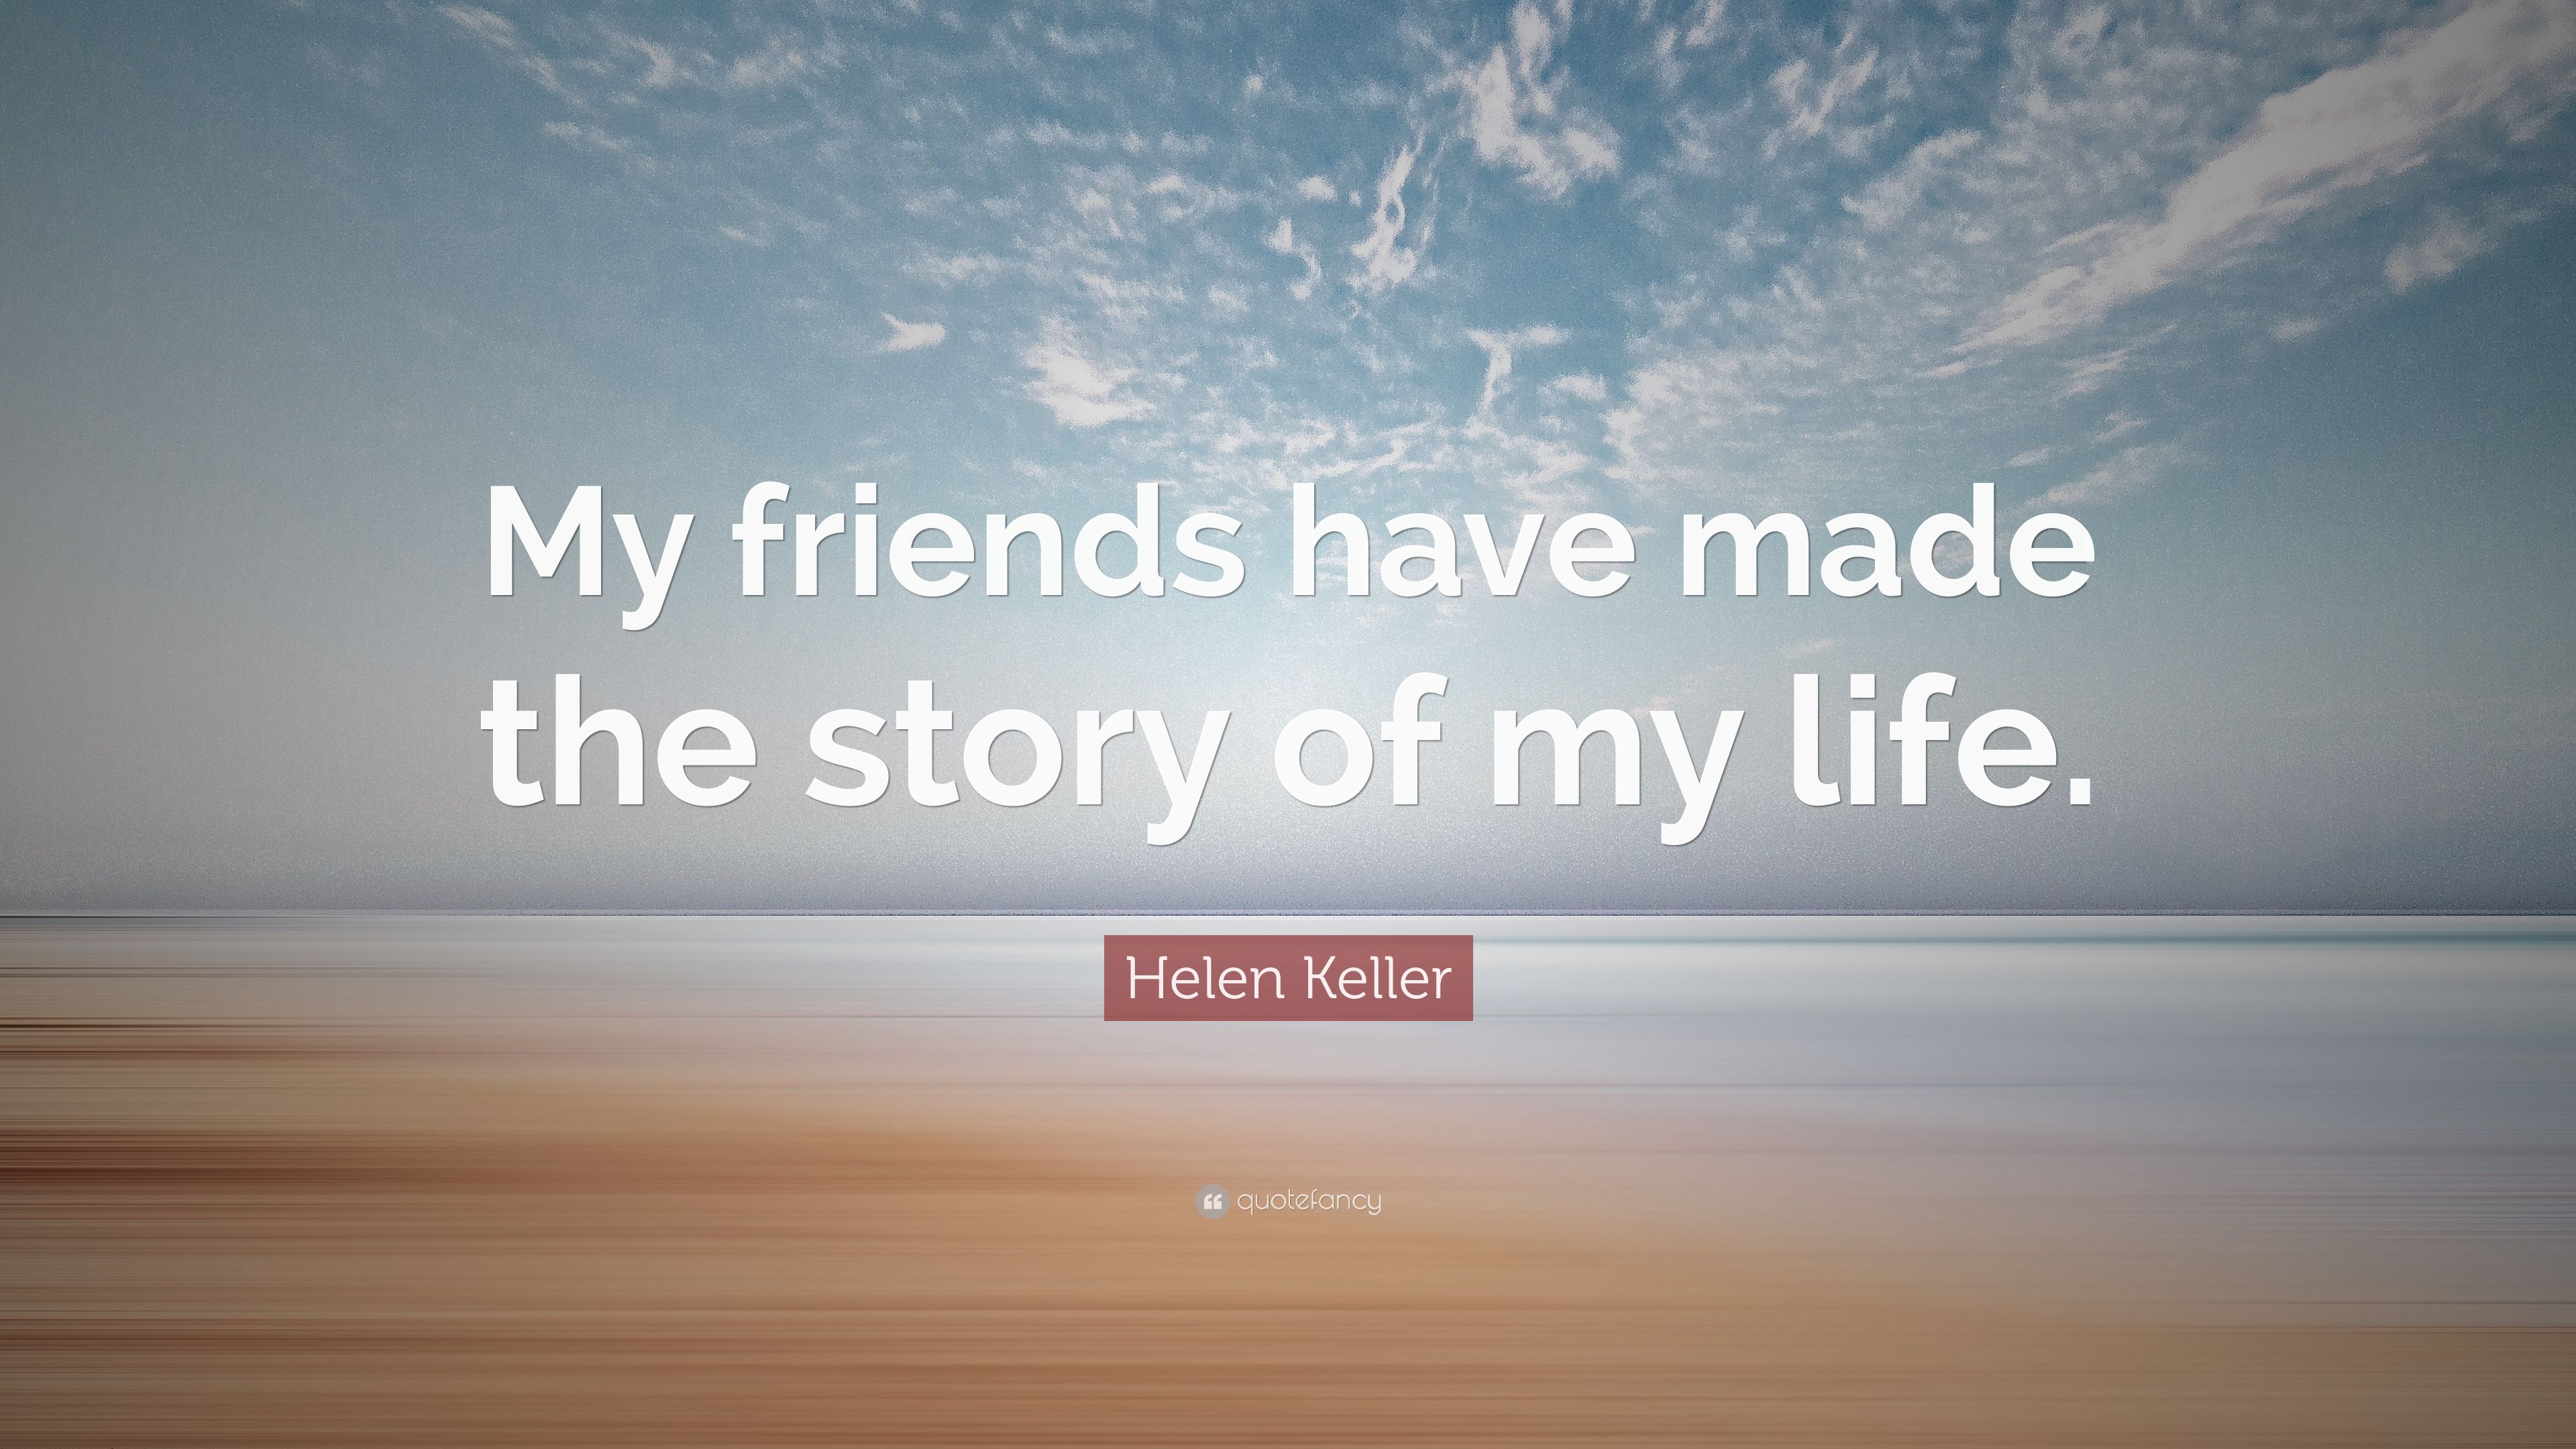 Helen Keller Quote: “My friends have made the story of my life